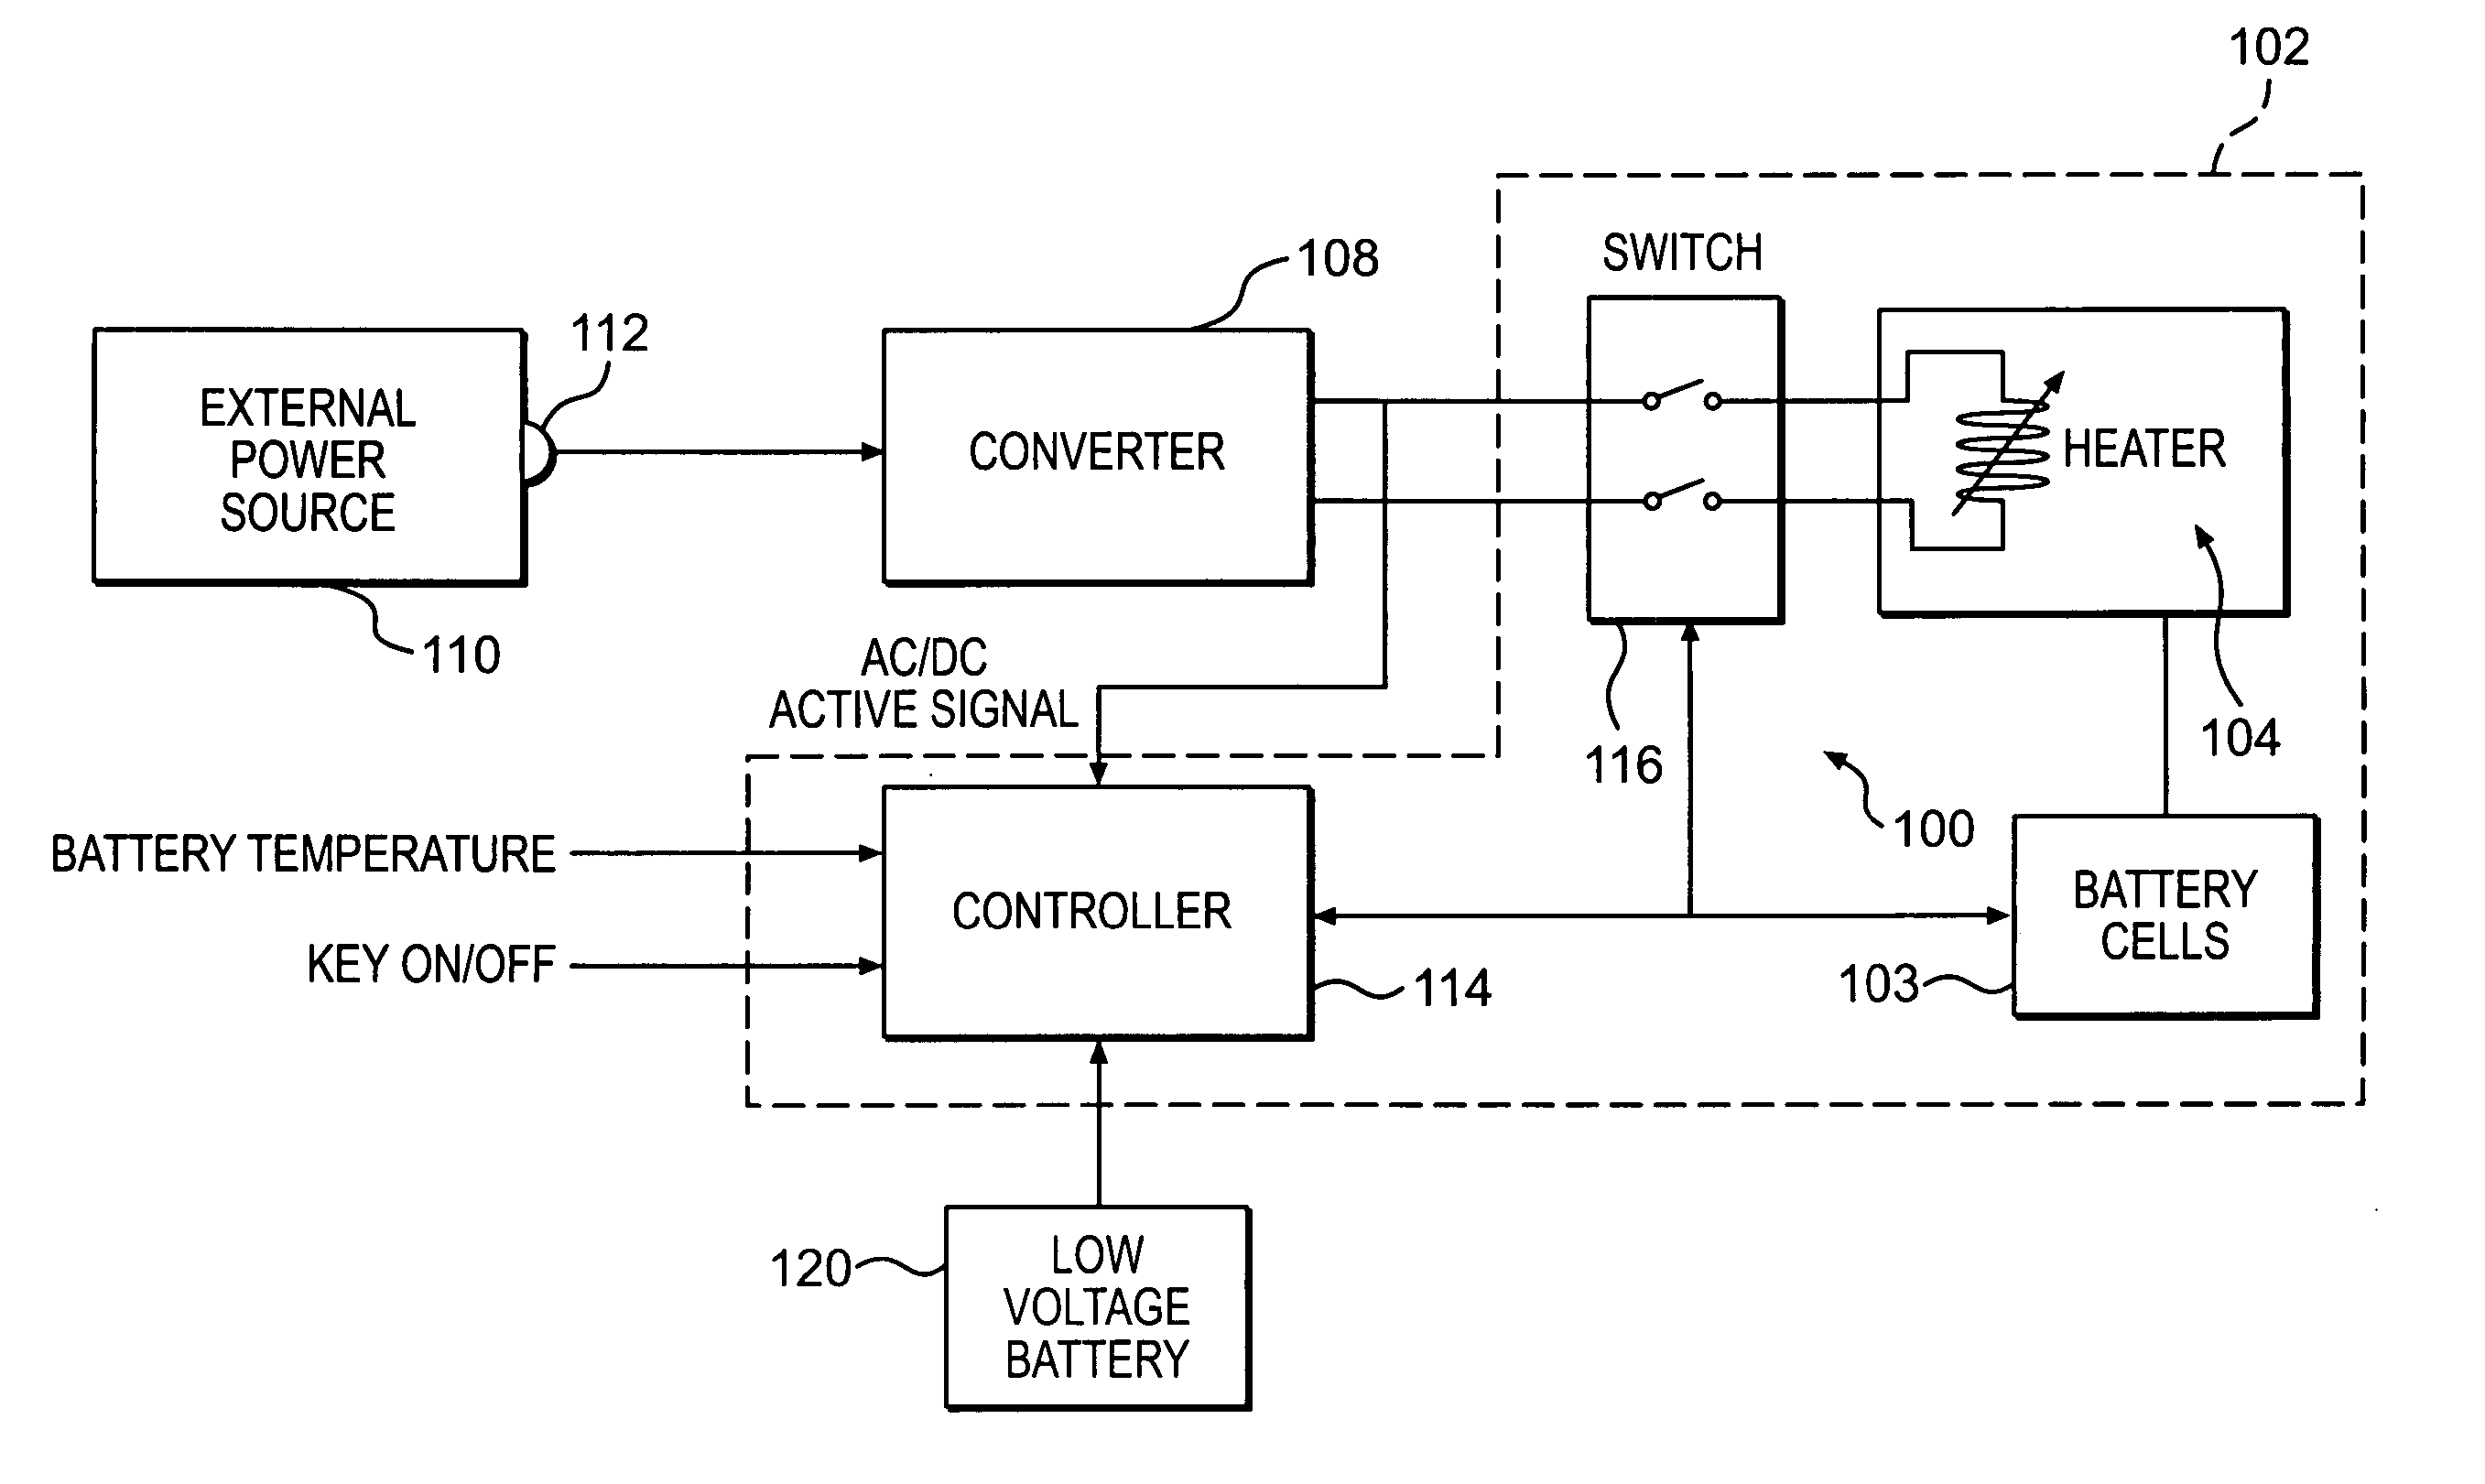 Electrical storage device heater for vehicle